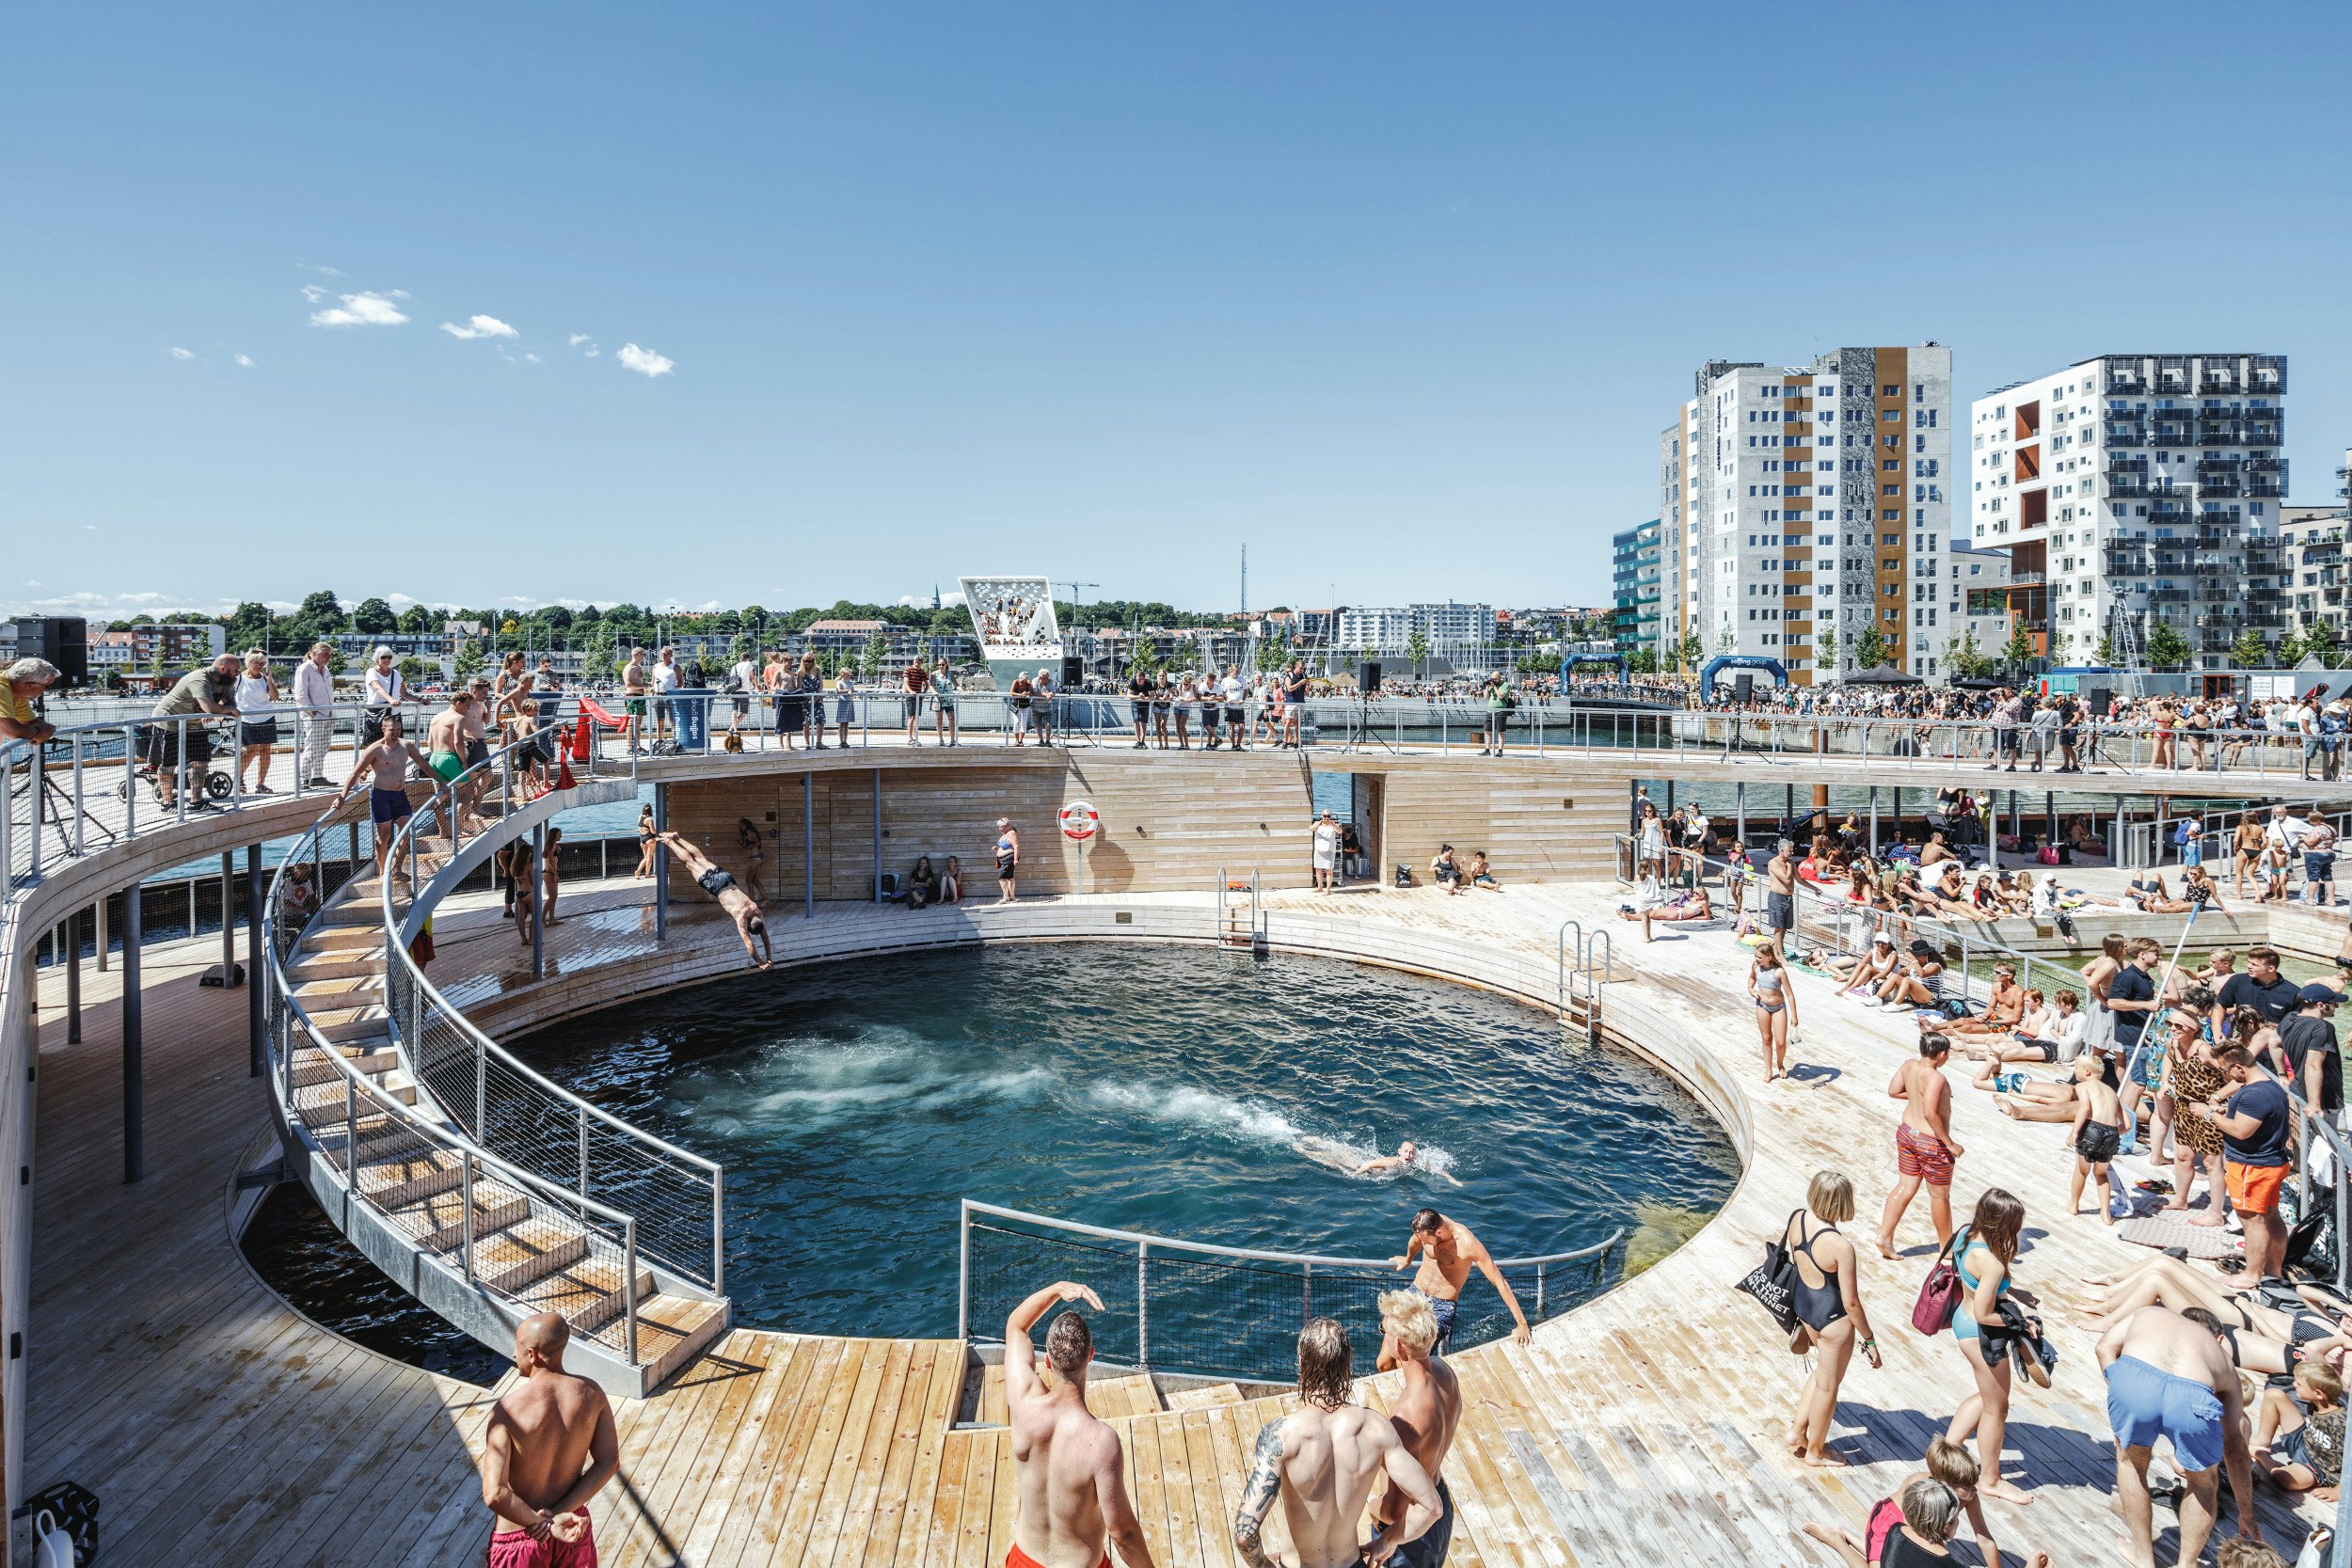 The baths include a circular diving pool.